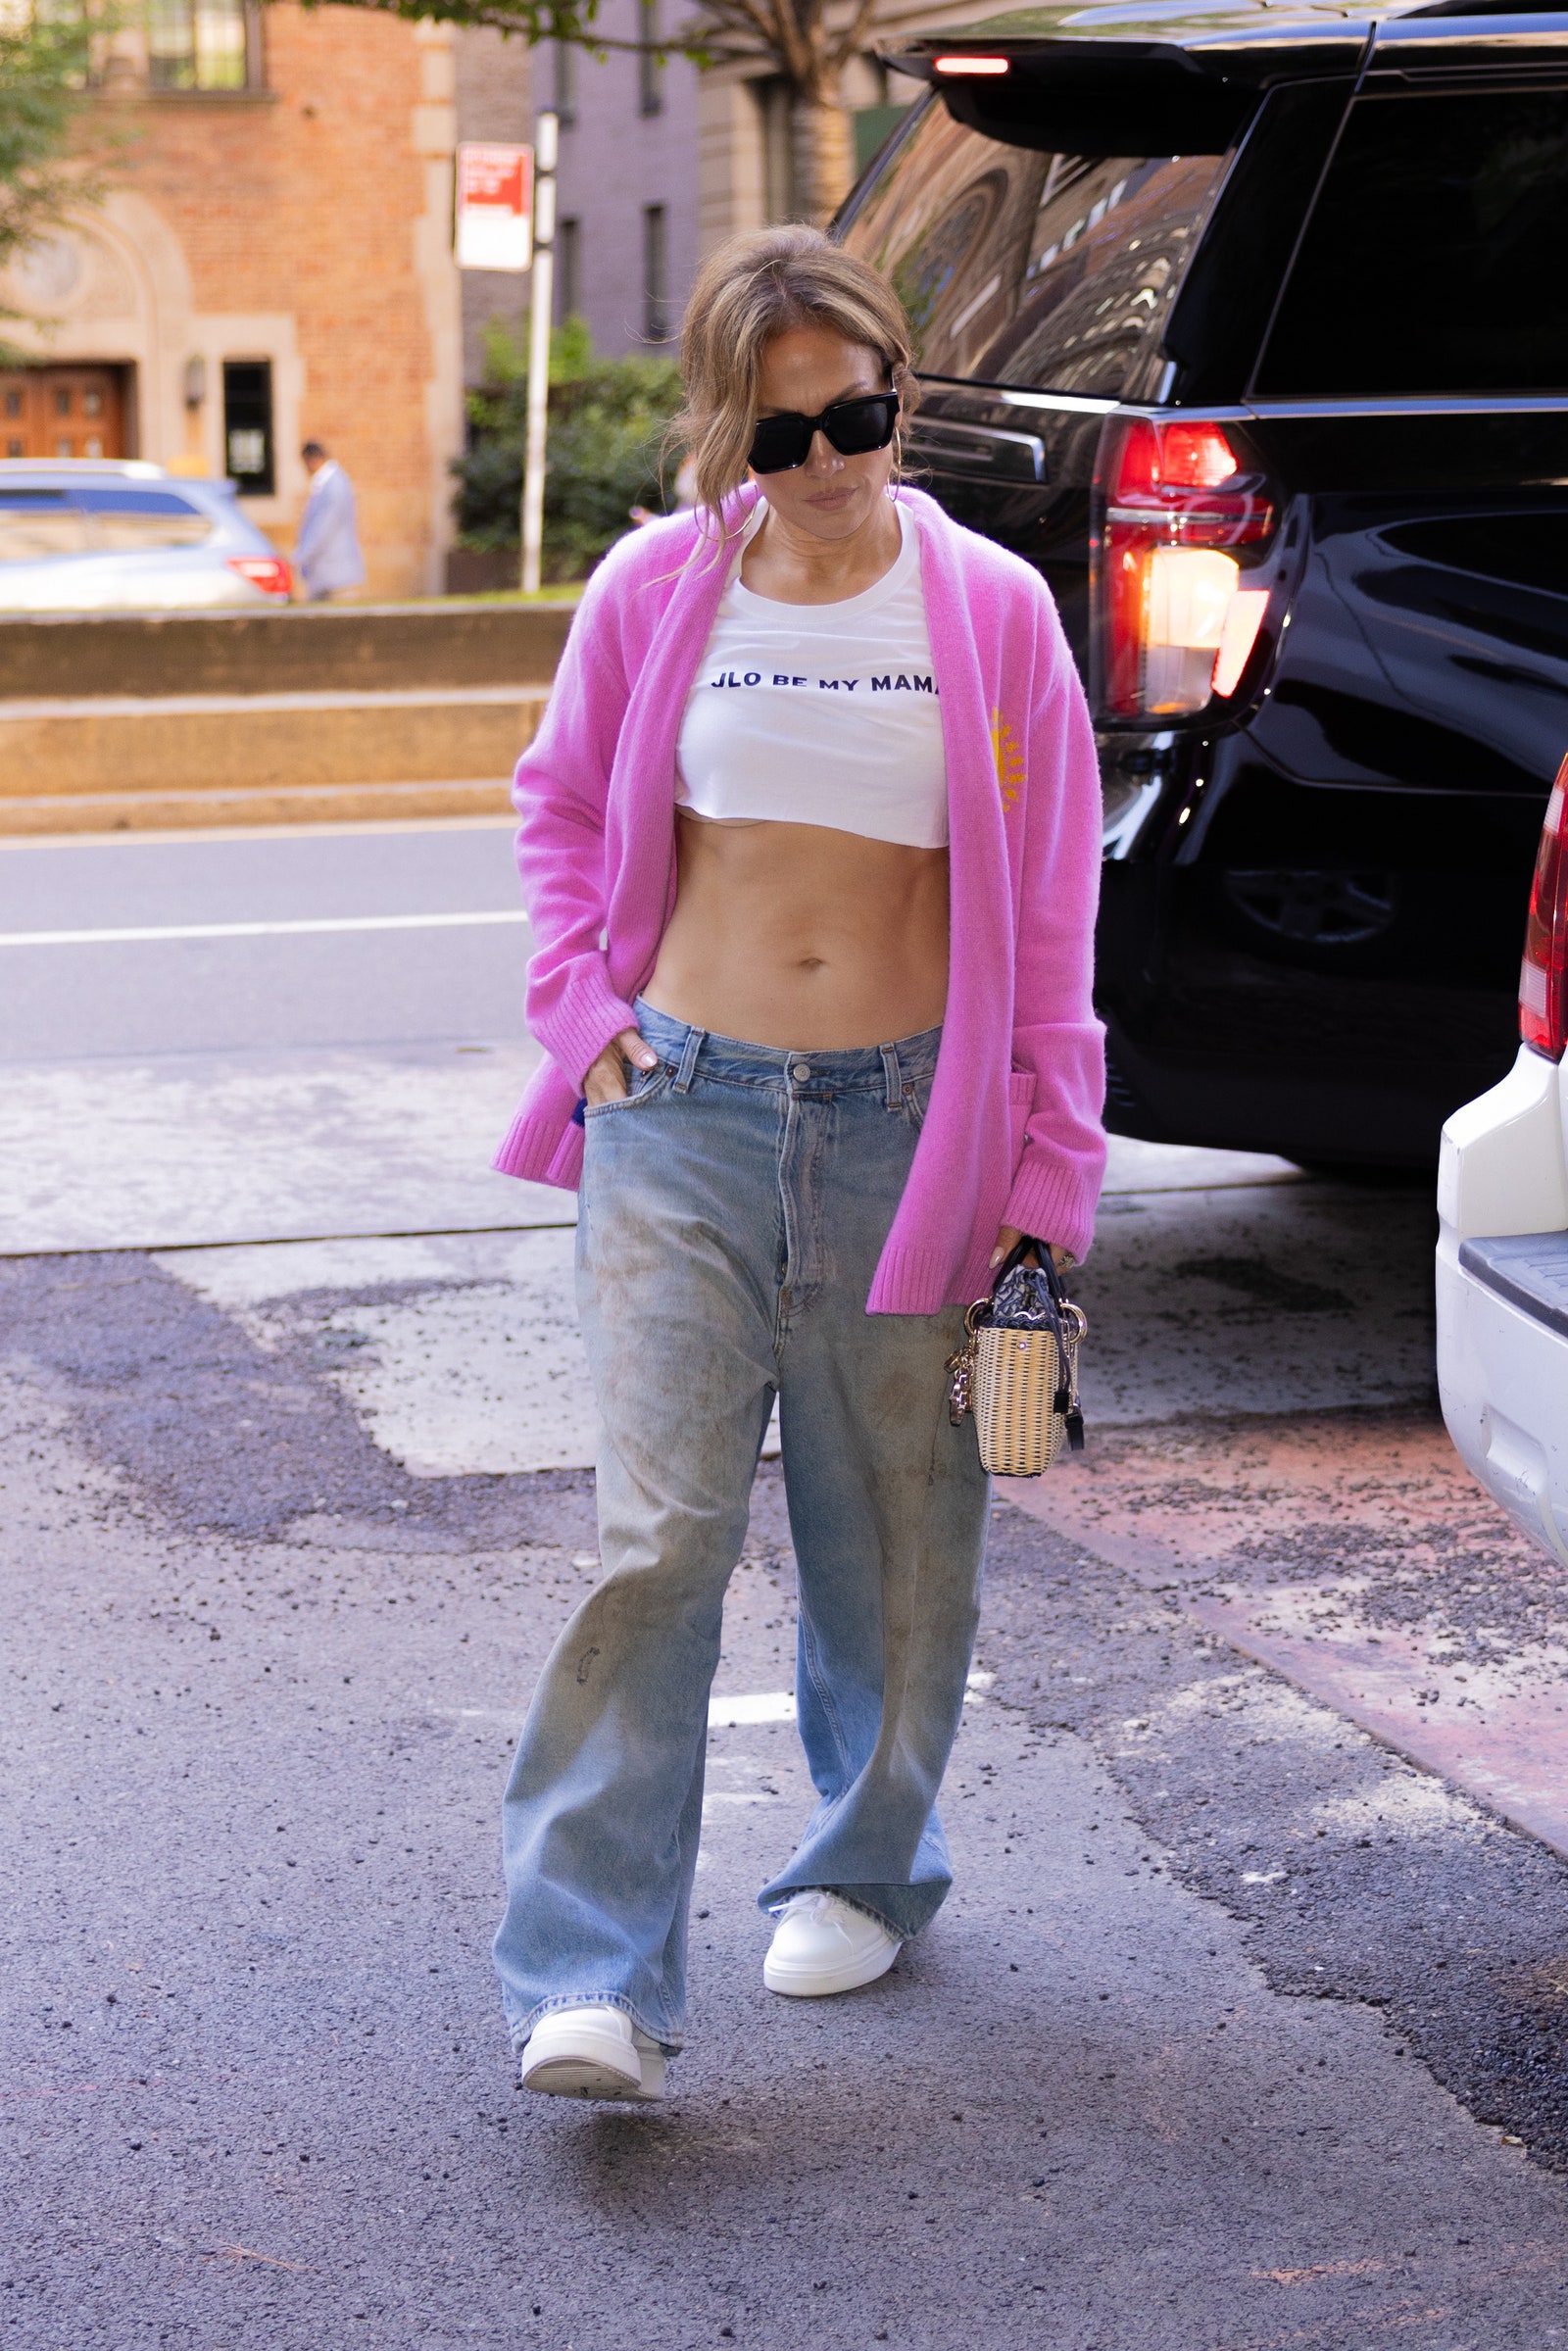 EXCLUSIVE Jennifer Lopez steps out in NYC showing off her abs wearing a “ JLO be my mama “ crop top shirt. She is still...